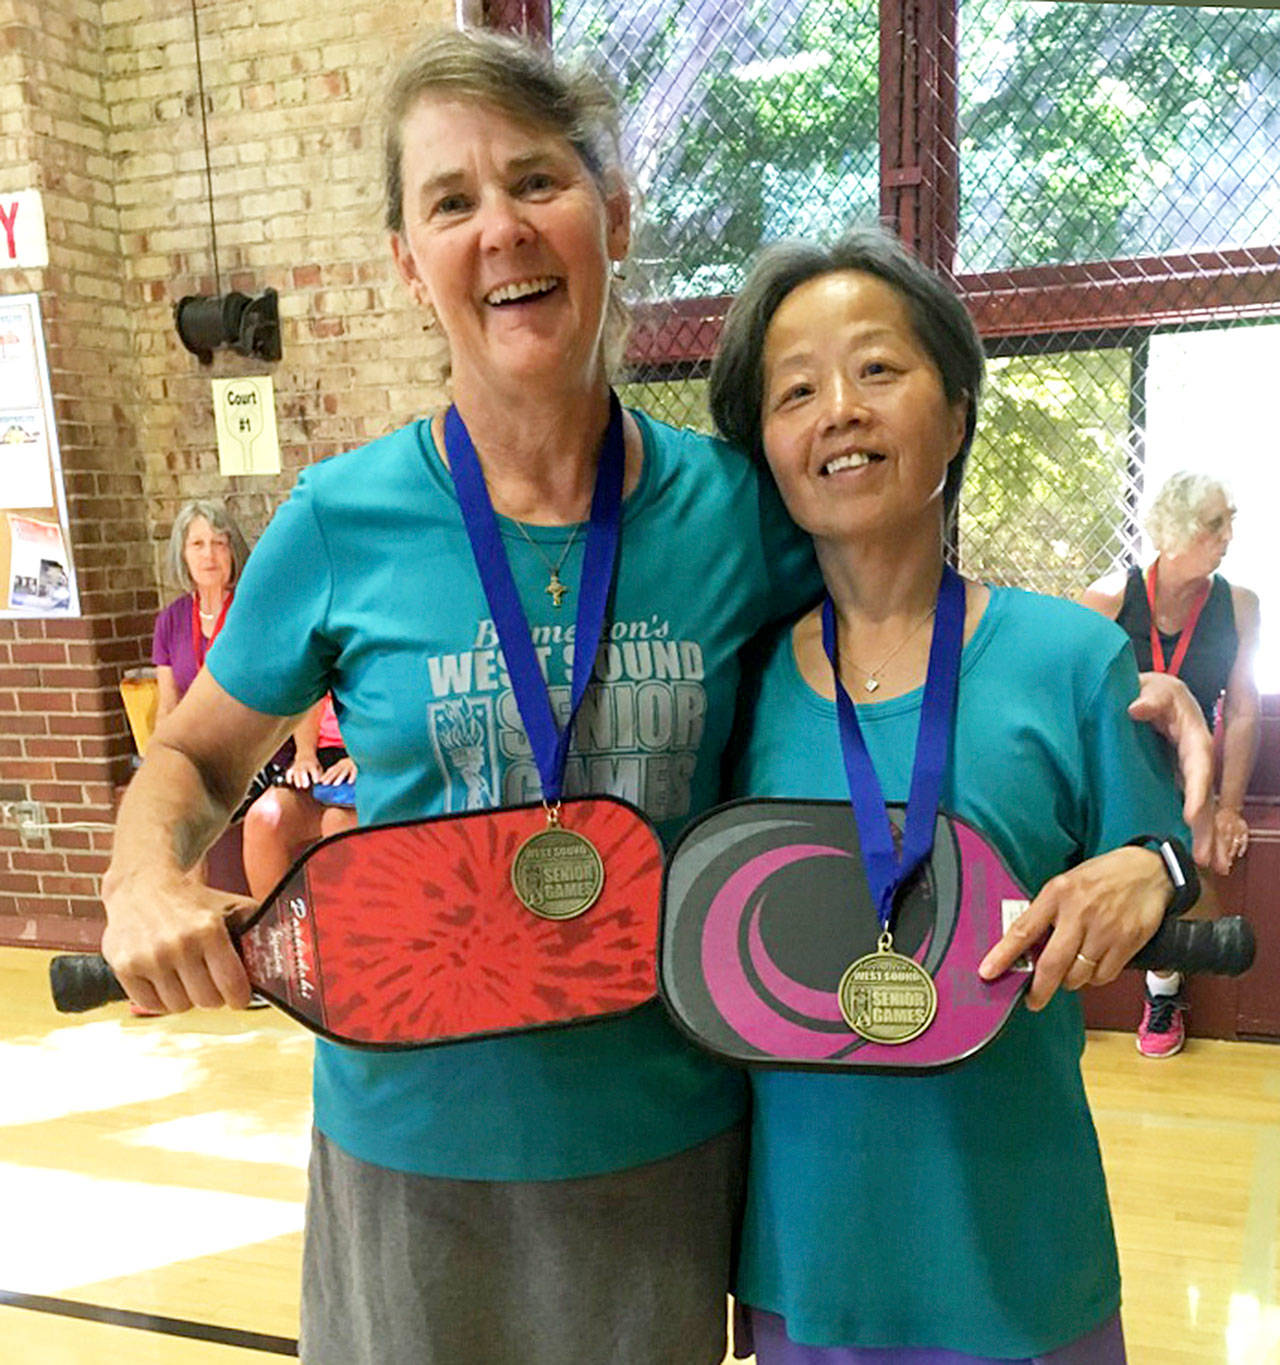 Sandi Gunn of Sequim and Yen Chen of Port Angeles won pickleball gold at the Bremerton West Sound Senior Games held Friday and Saturday in the 65-69 women’s doubles. Gunn also won gold with Forrest Franz of Sequim in the 65-69 mixed doubles while Chen won Silver with Richard Reed of Port Angeles in the 60-64 mixed doubles.